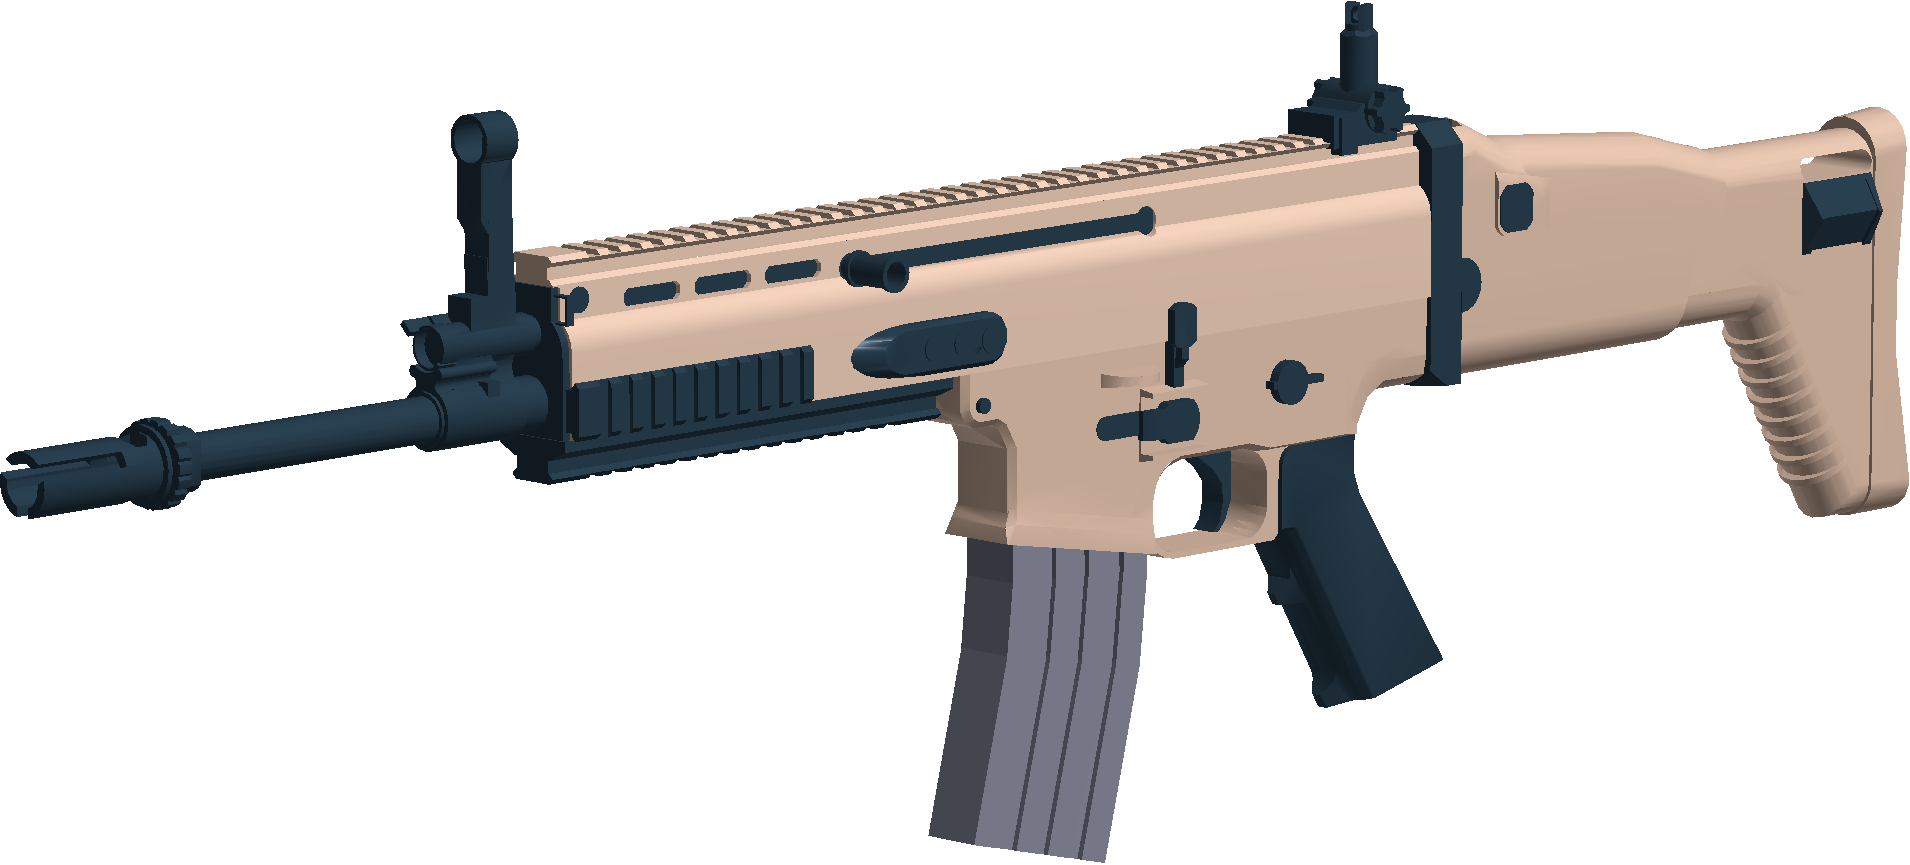 Scar L Phantom Forces Wiki Fandom - how to get phantom forces guns in your roblox game